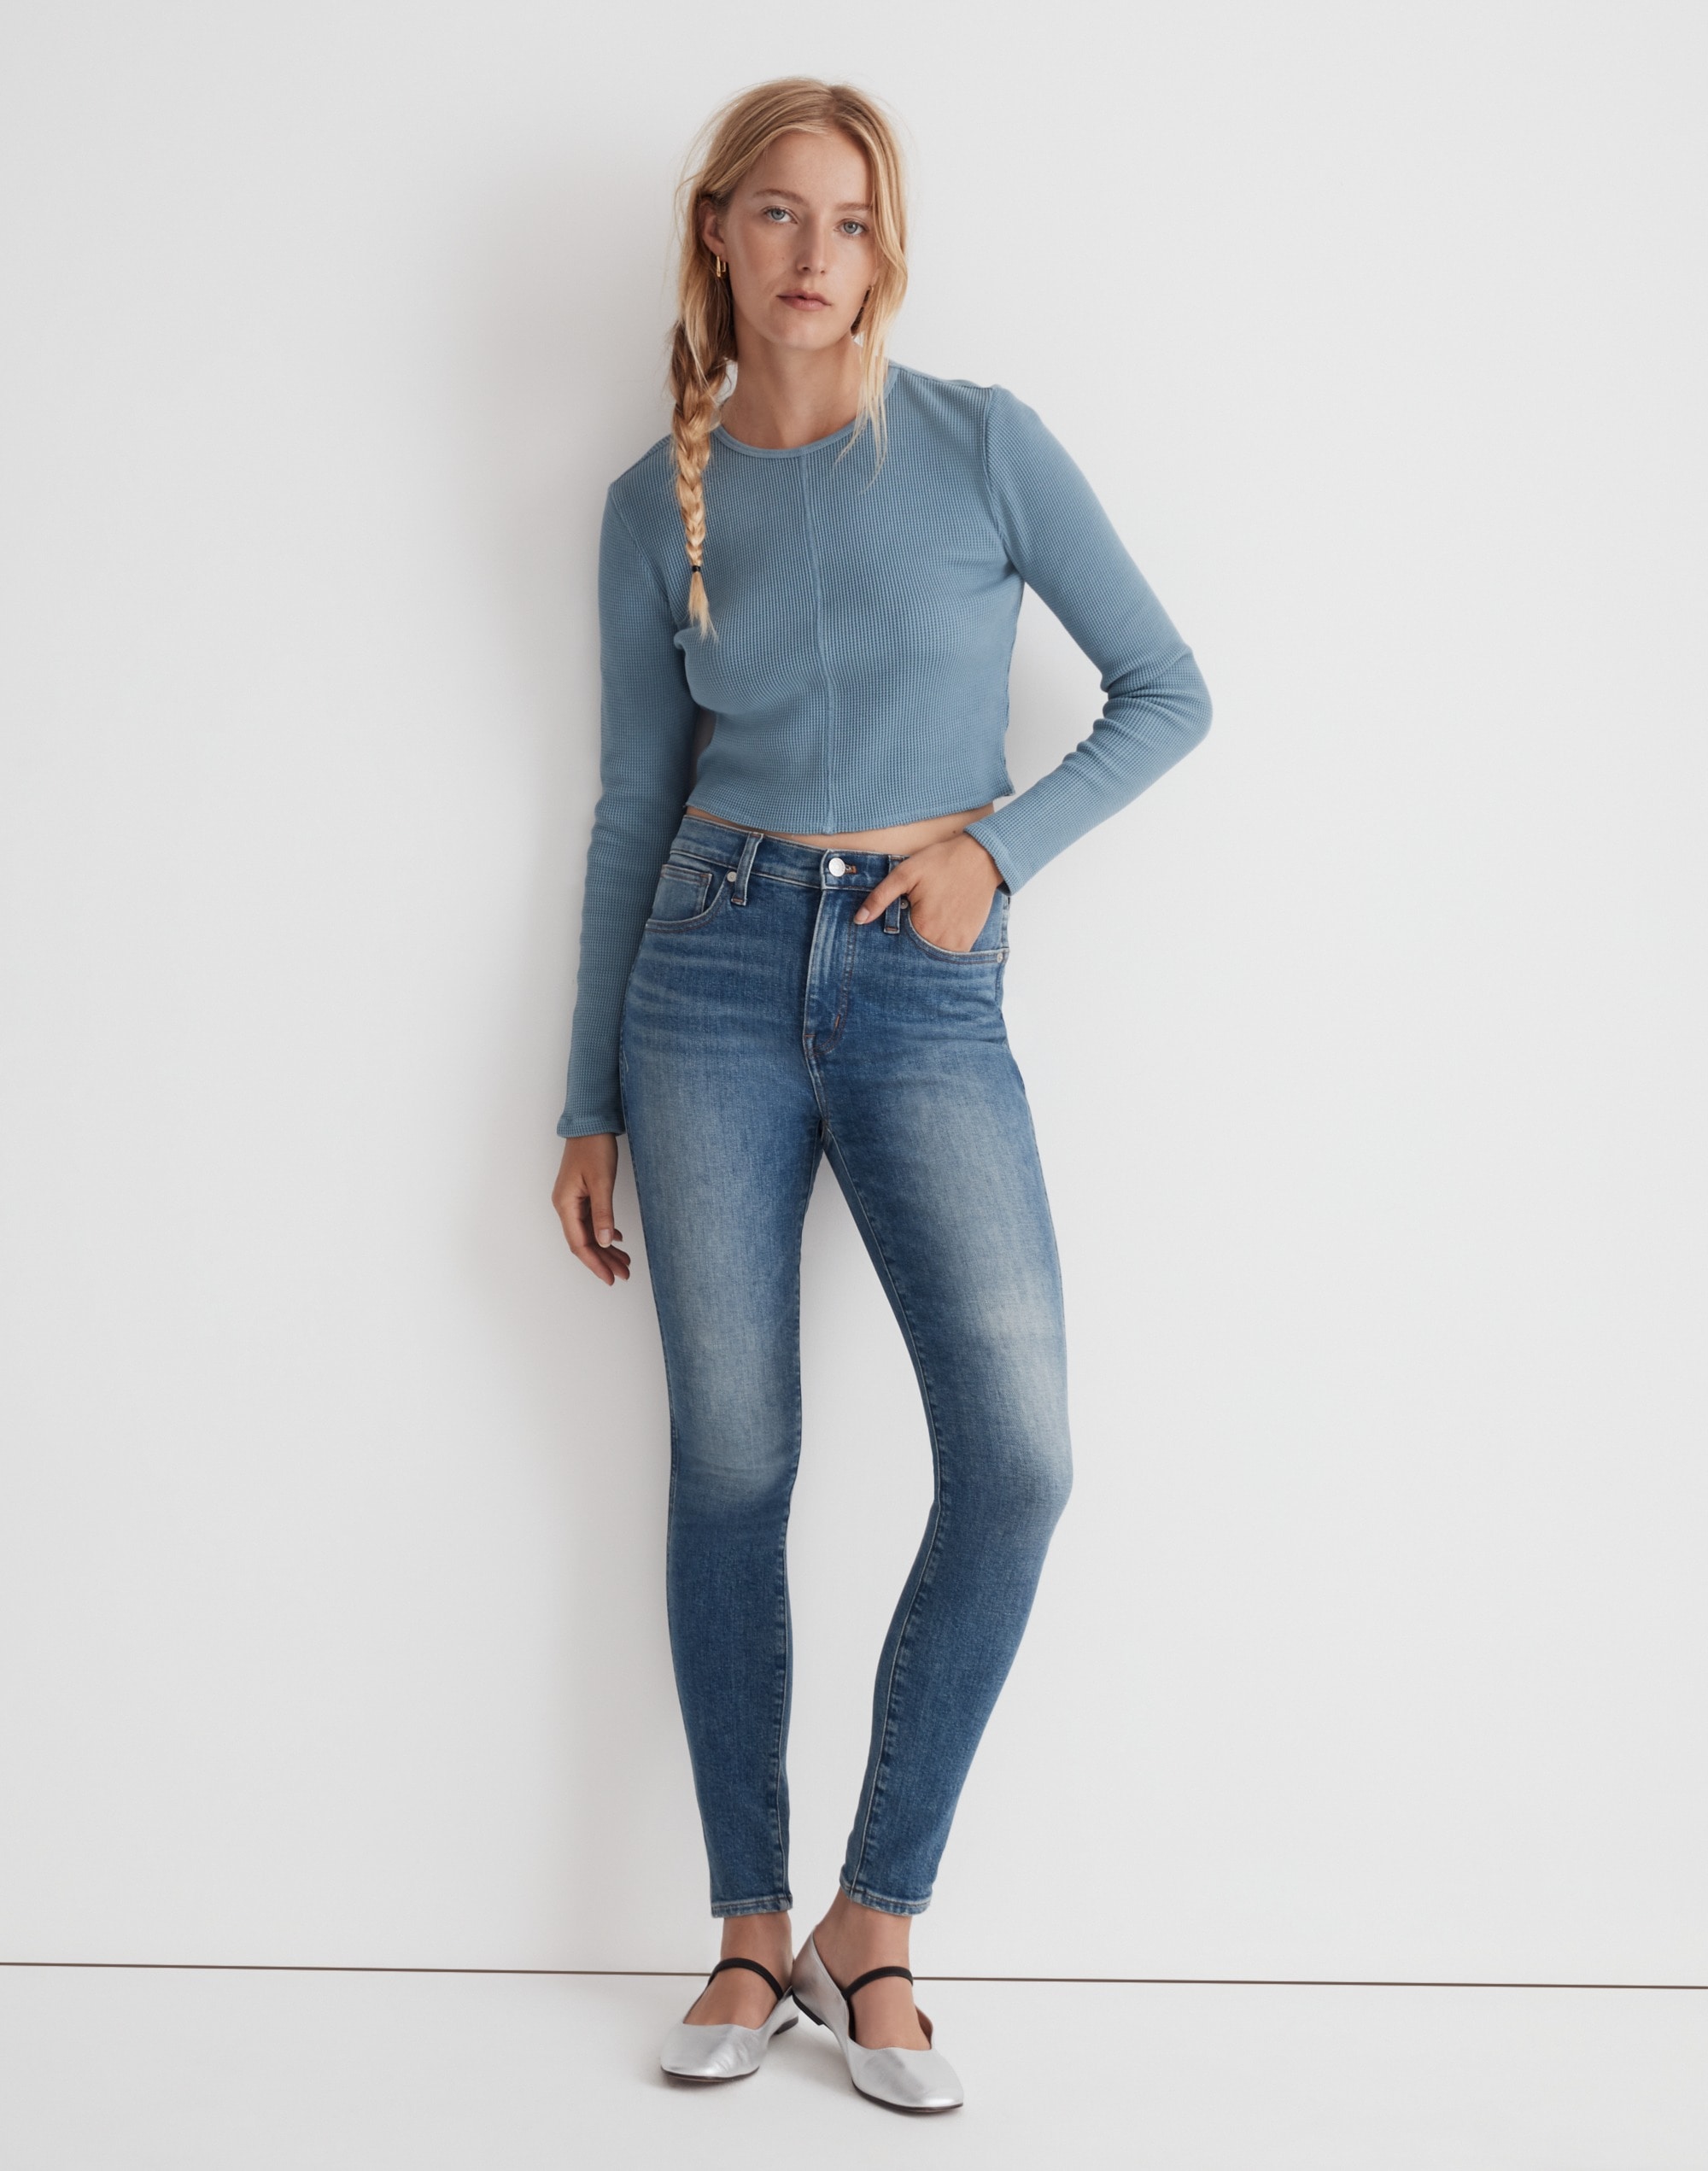 10" High-Rise Skinny Jeans in Cayer Wash